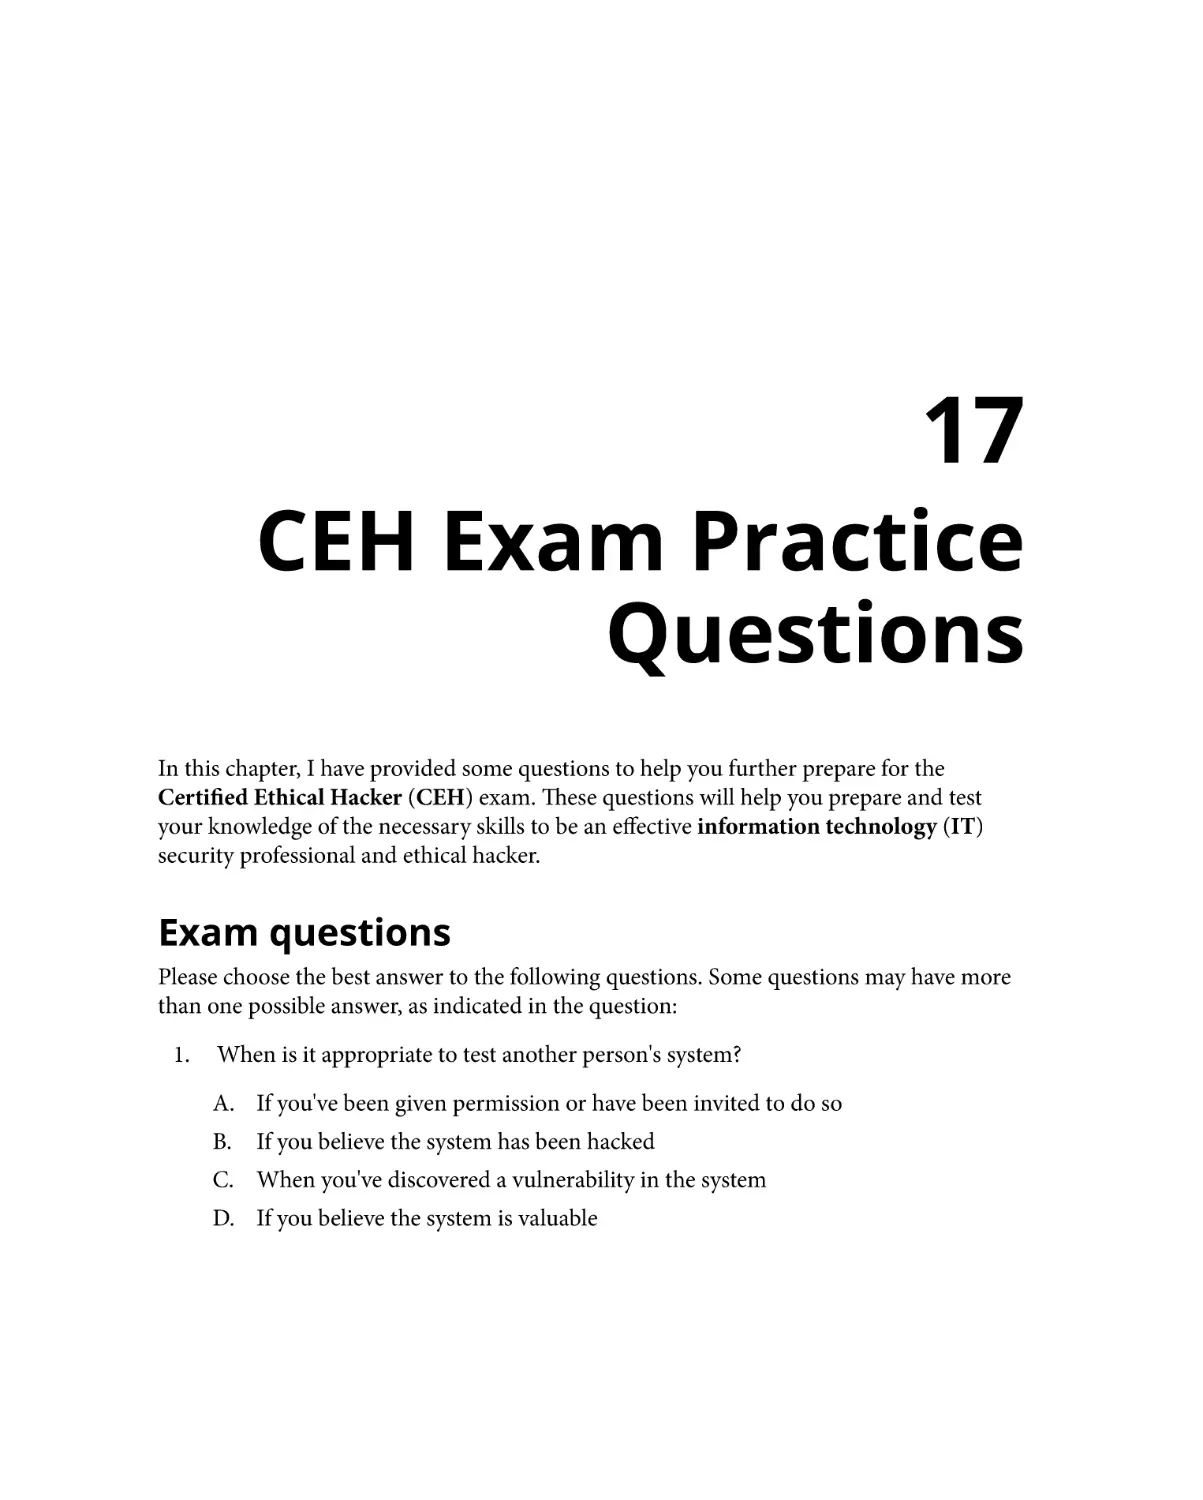 Chapter 17
Exam questions